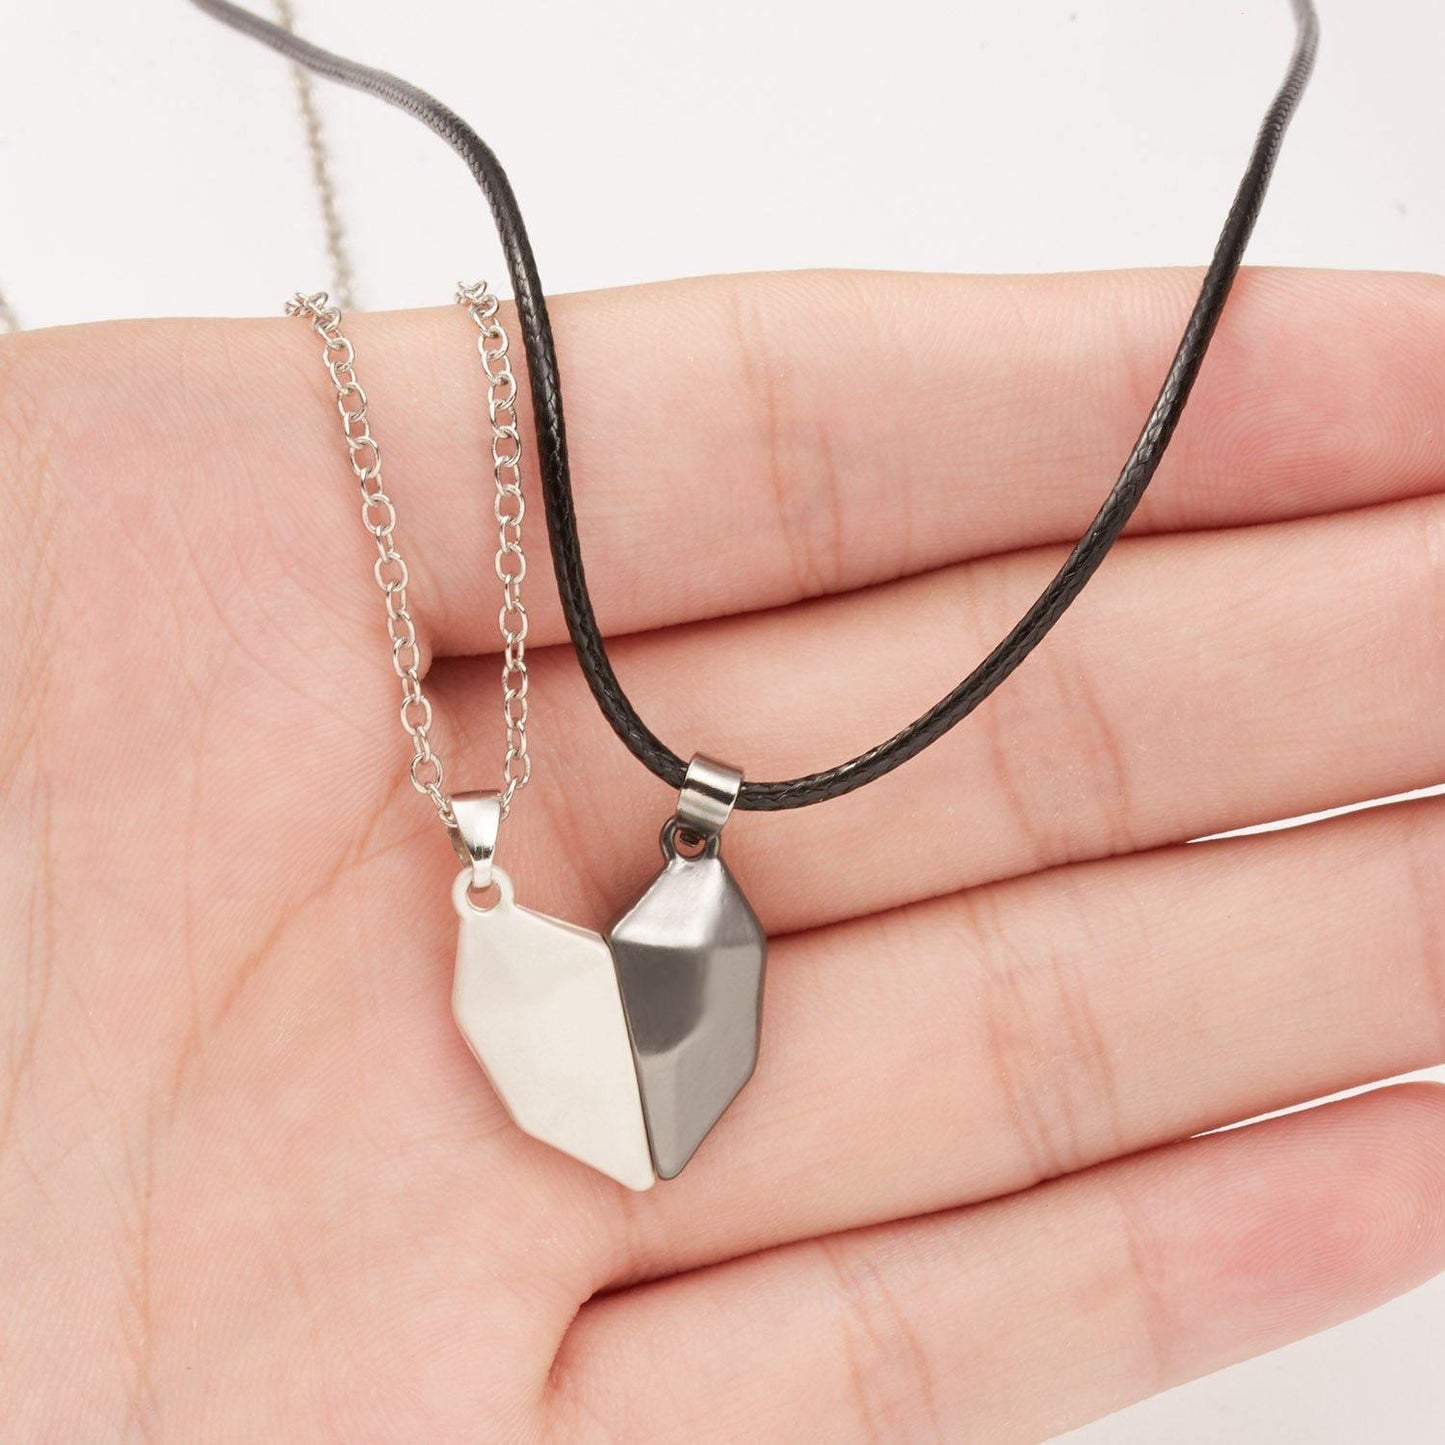 Magnetic Connecting Best Friend Necklace For Bestie in 2023 | Magnetic Connecting Best Friend Necklace For Bestie - undefined | best friend necklace for 2, best friend necklaces magnetic, Friendship Pendant Necklaces, gift ideas for Best Friends, Magnetic Friendship necklace, Magnetic heart Necklace, To My Best Friend Friendship Gift Necklace Set | From Hunny Life | hunnylife.com